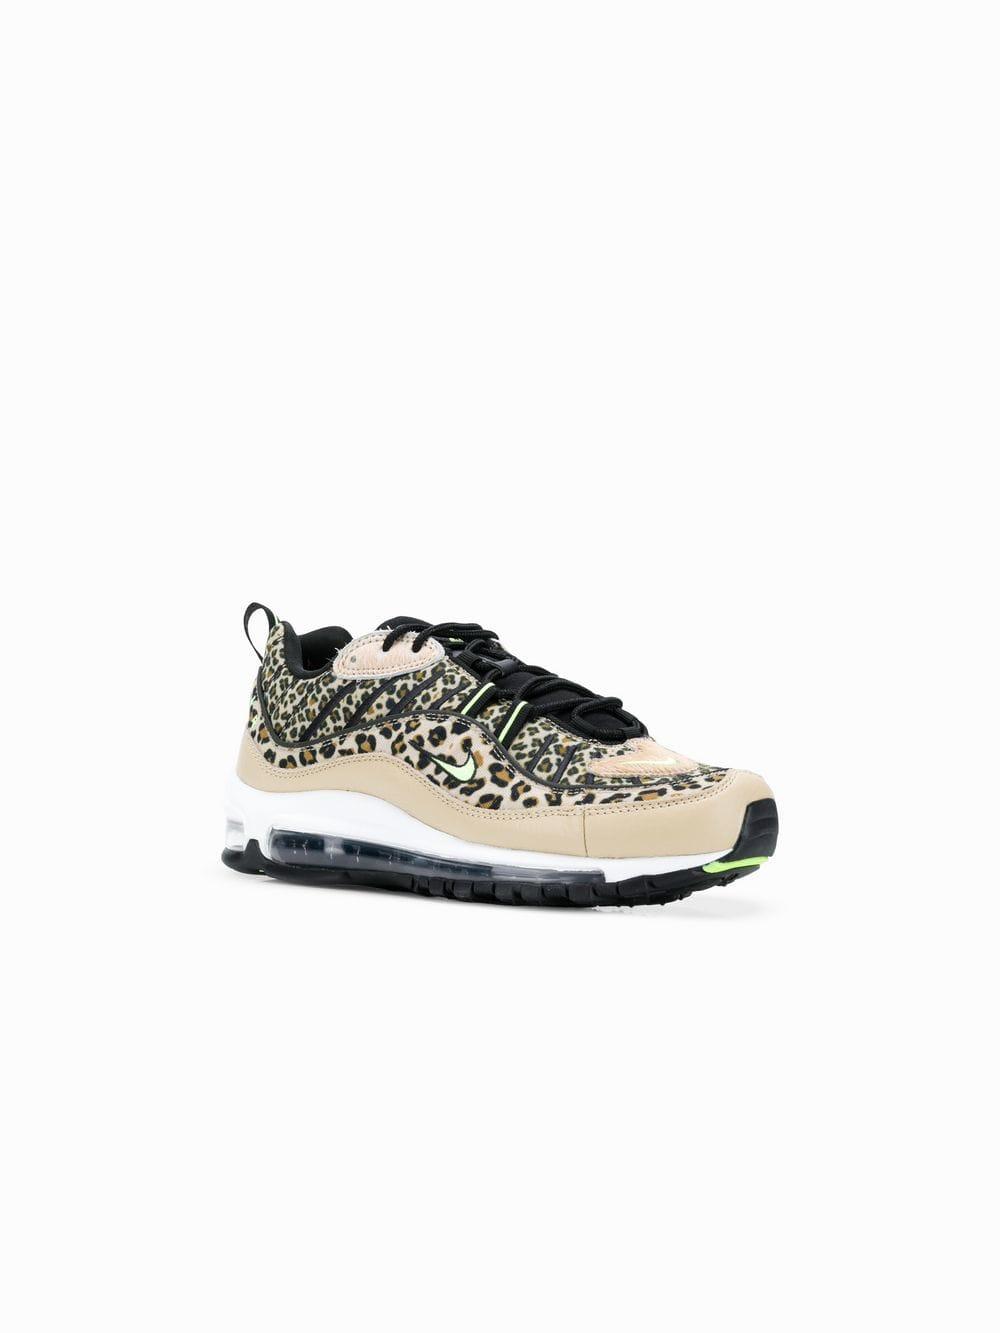 Nike Leather Air Max 98 Leopard Print Sneakers in Brown - Lyst